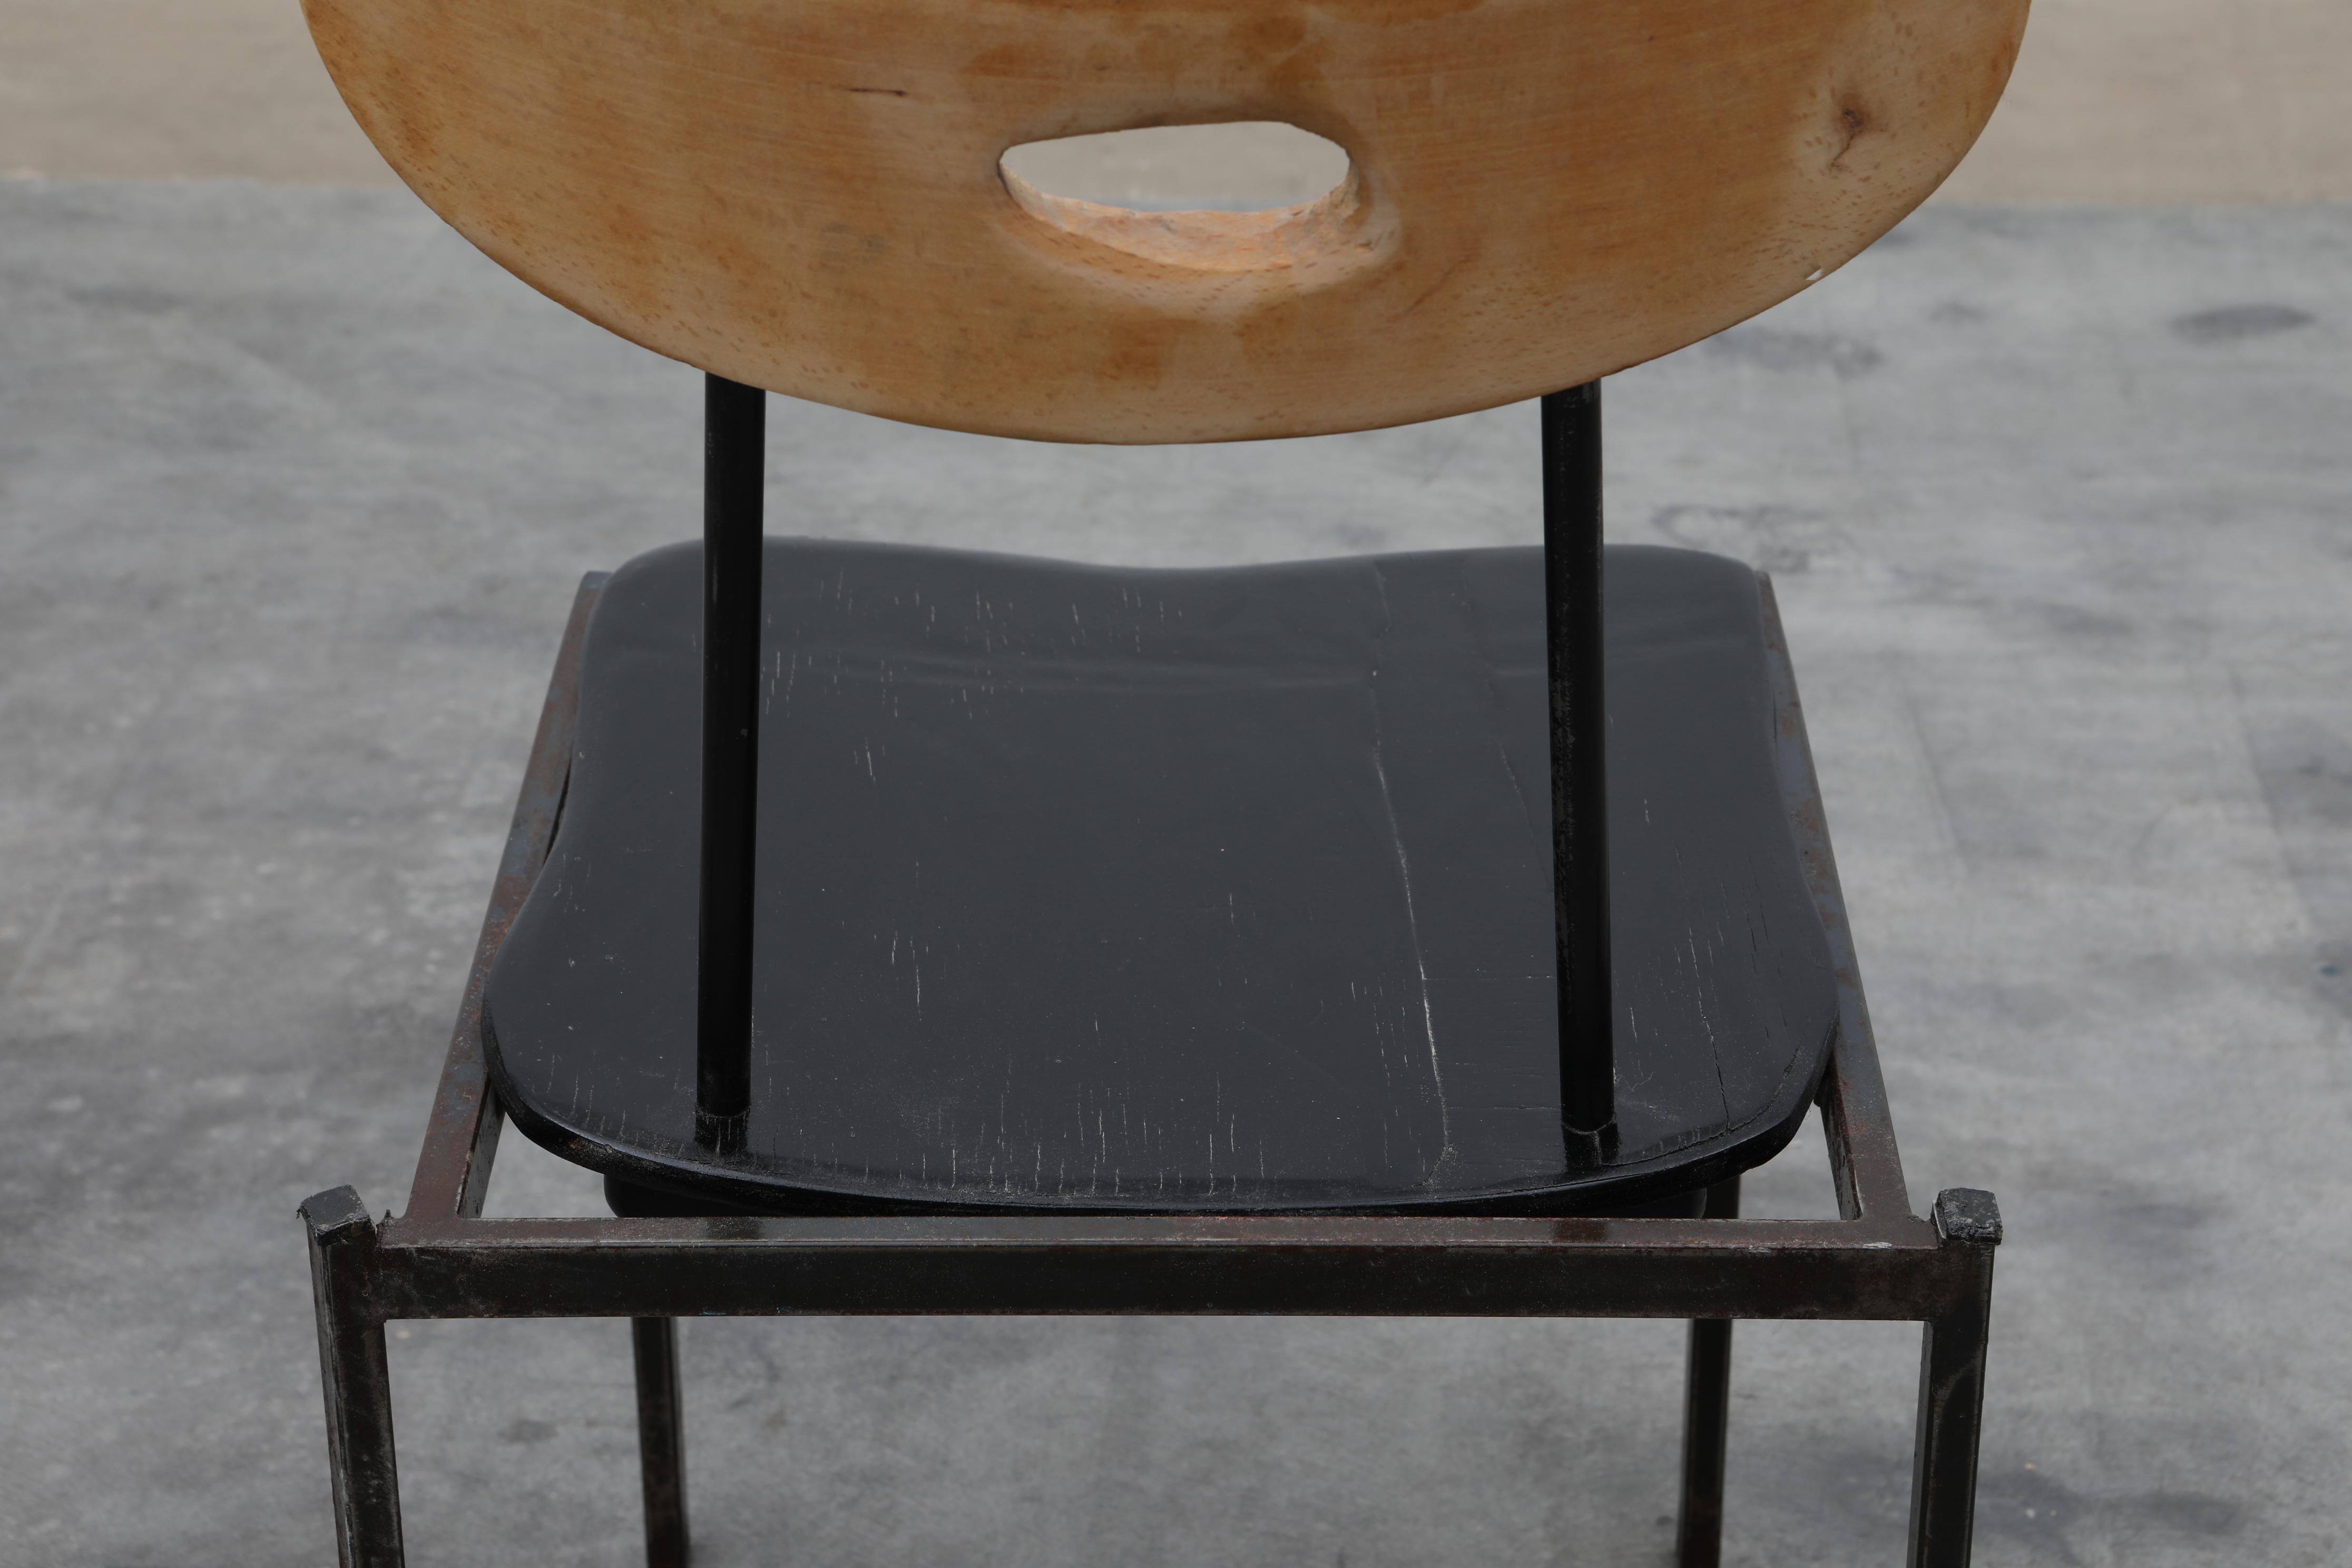 German Untitled Chair by Markus Friedrich Staab from the Black Is Beautiful Series